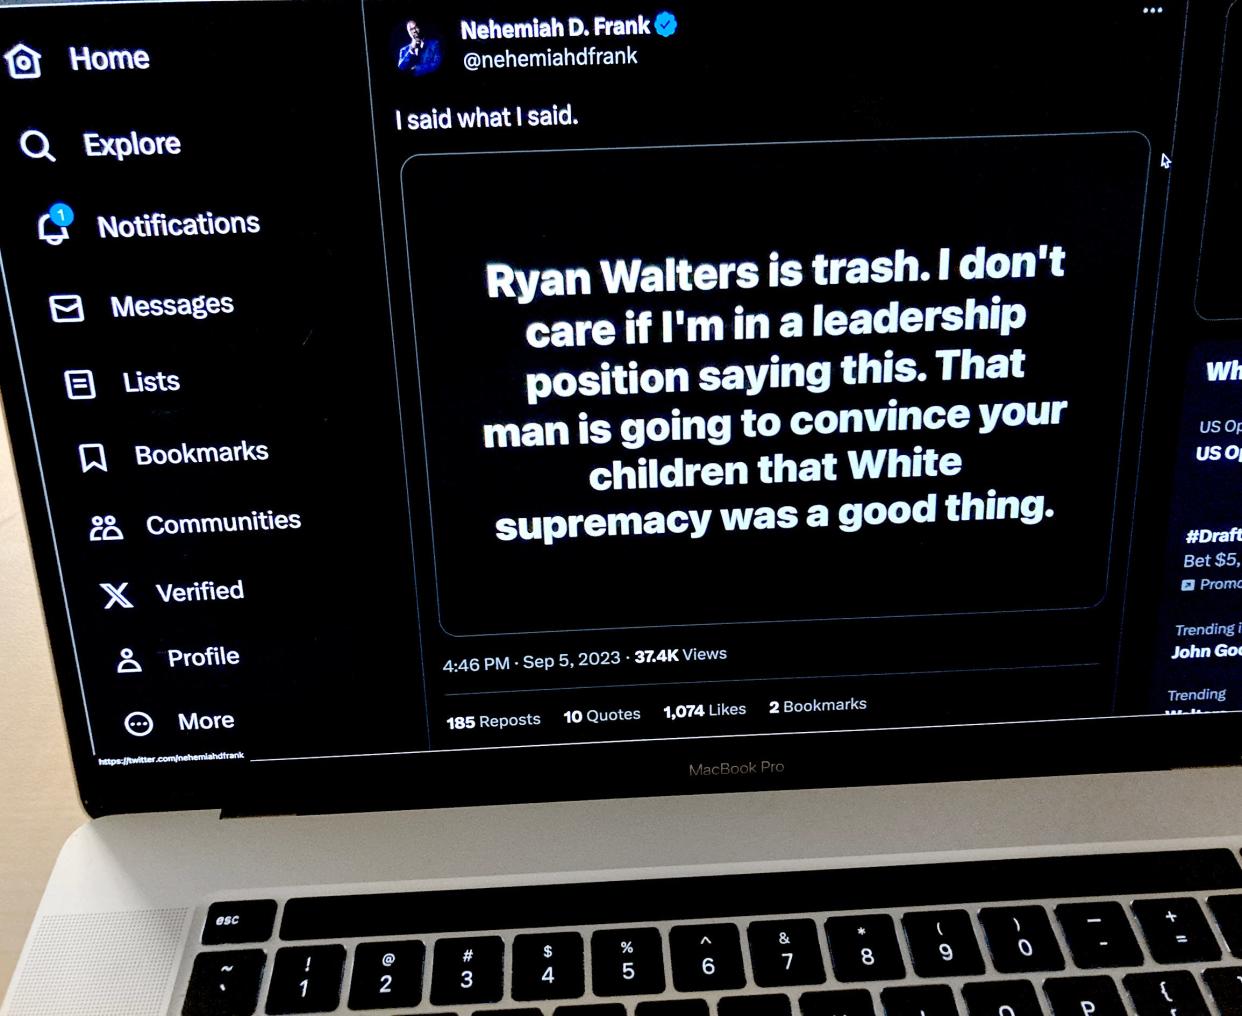 This is a social media post by Black Wall Street Times' founder and editor-in-chief, Nehemiah D. Frank, directed at Oklahoma state schools Superintendent Ryan Walters.